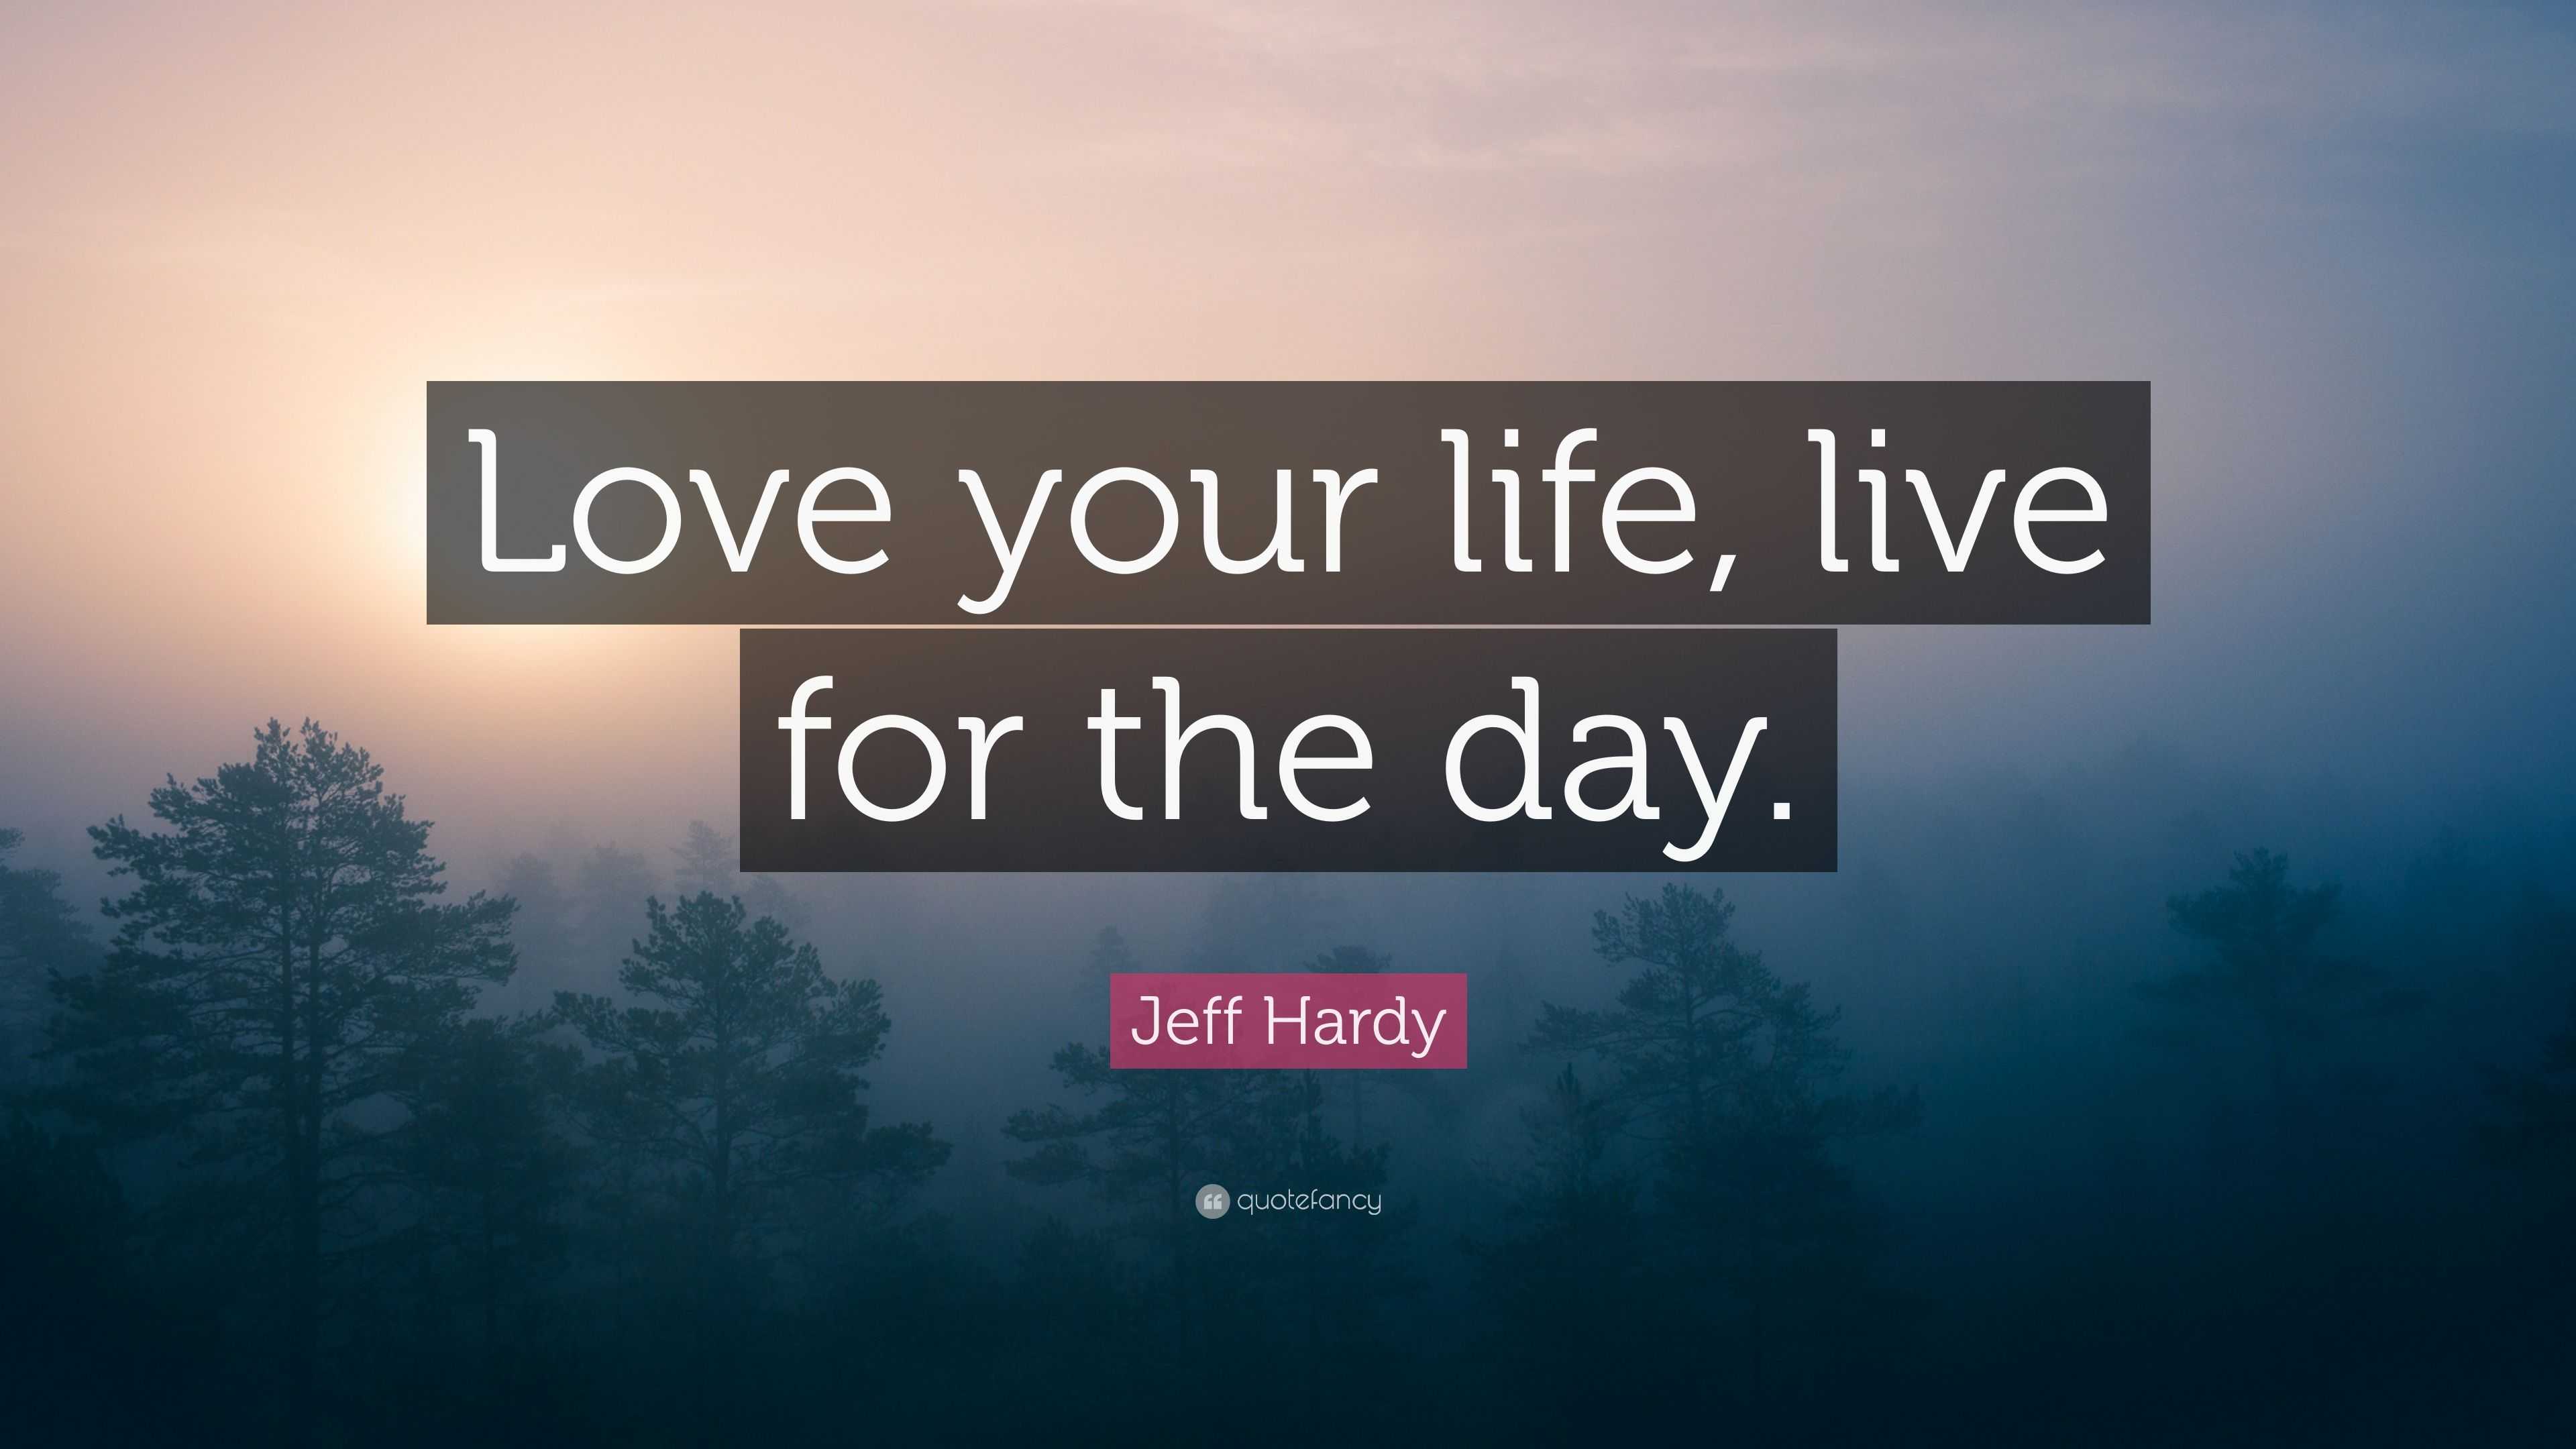 love your life quotes jeff hardy quote u201clove your life live for the day u201d 9